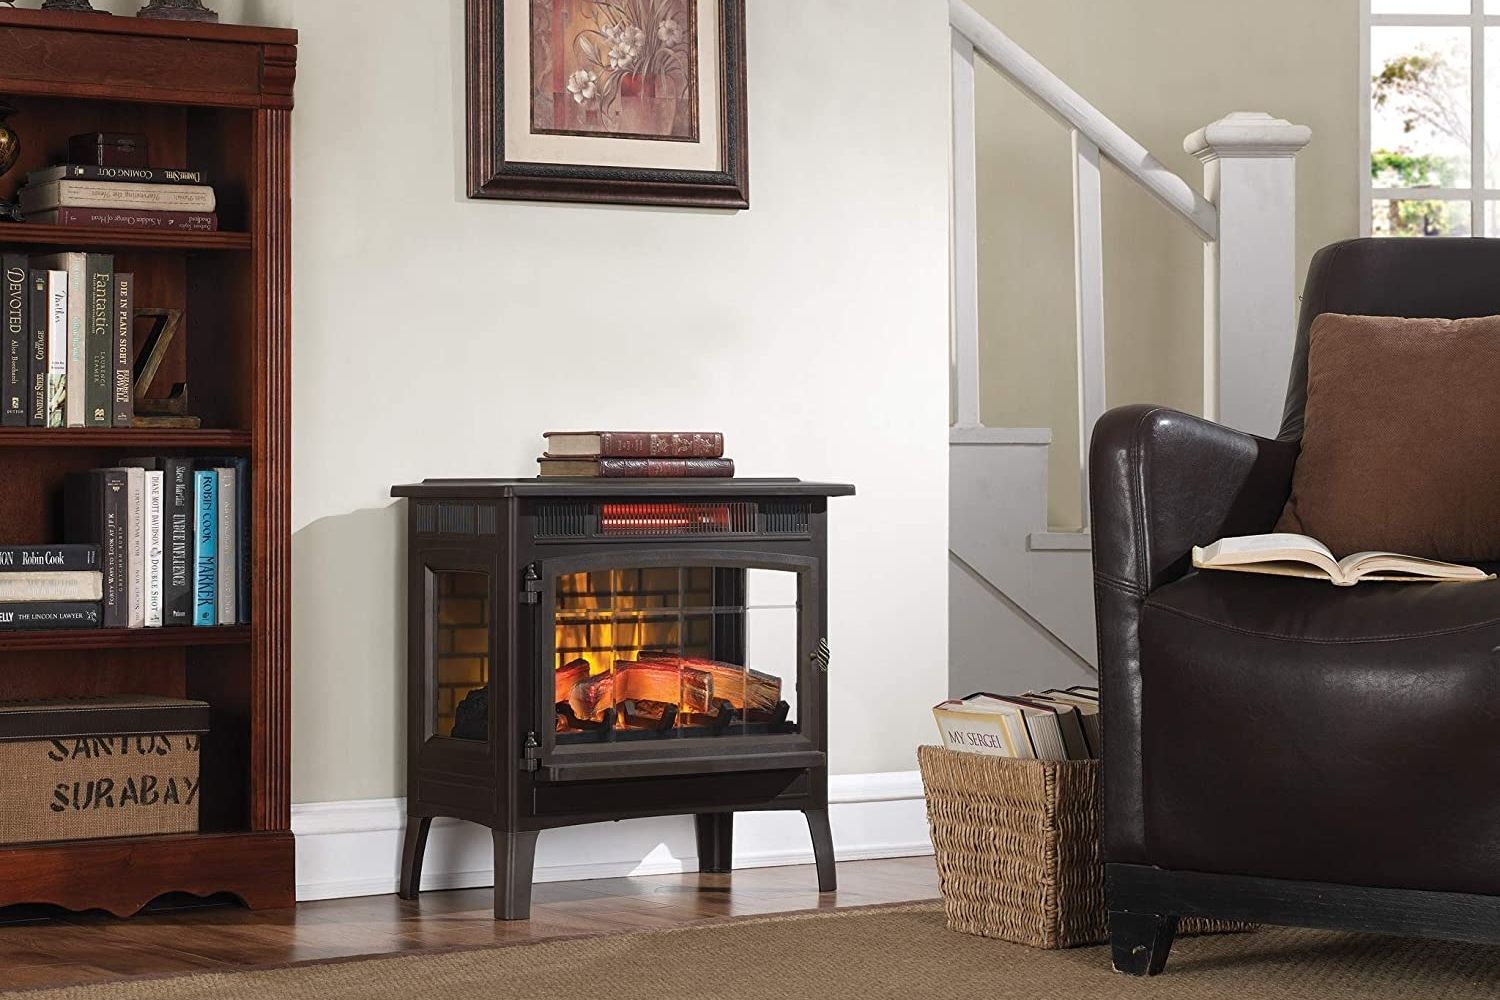 The best electric fireplace stove option with a fire going in a living room next to a recliner